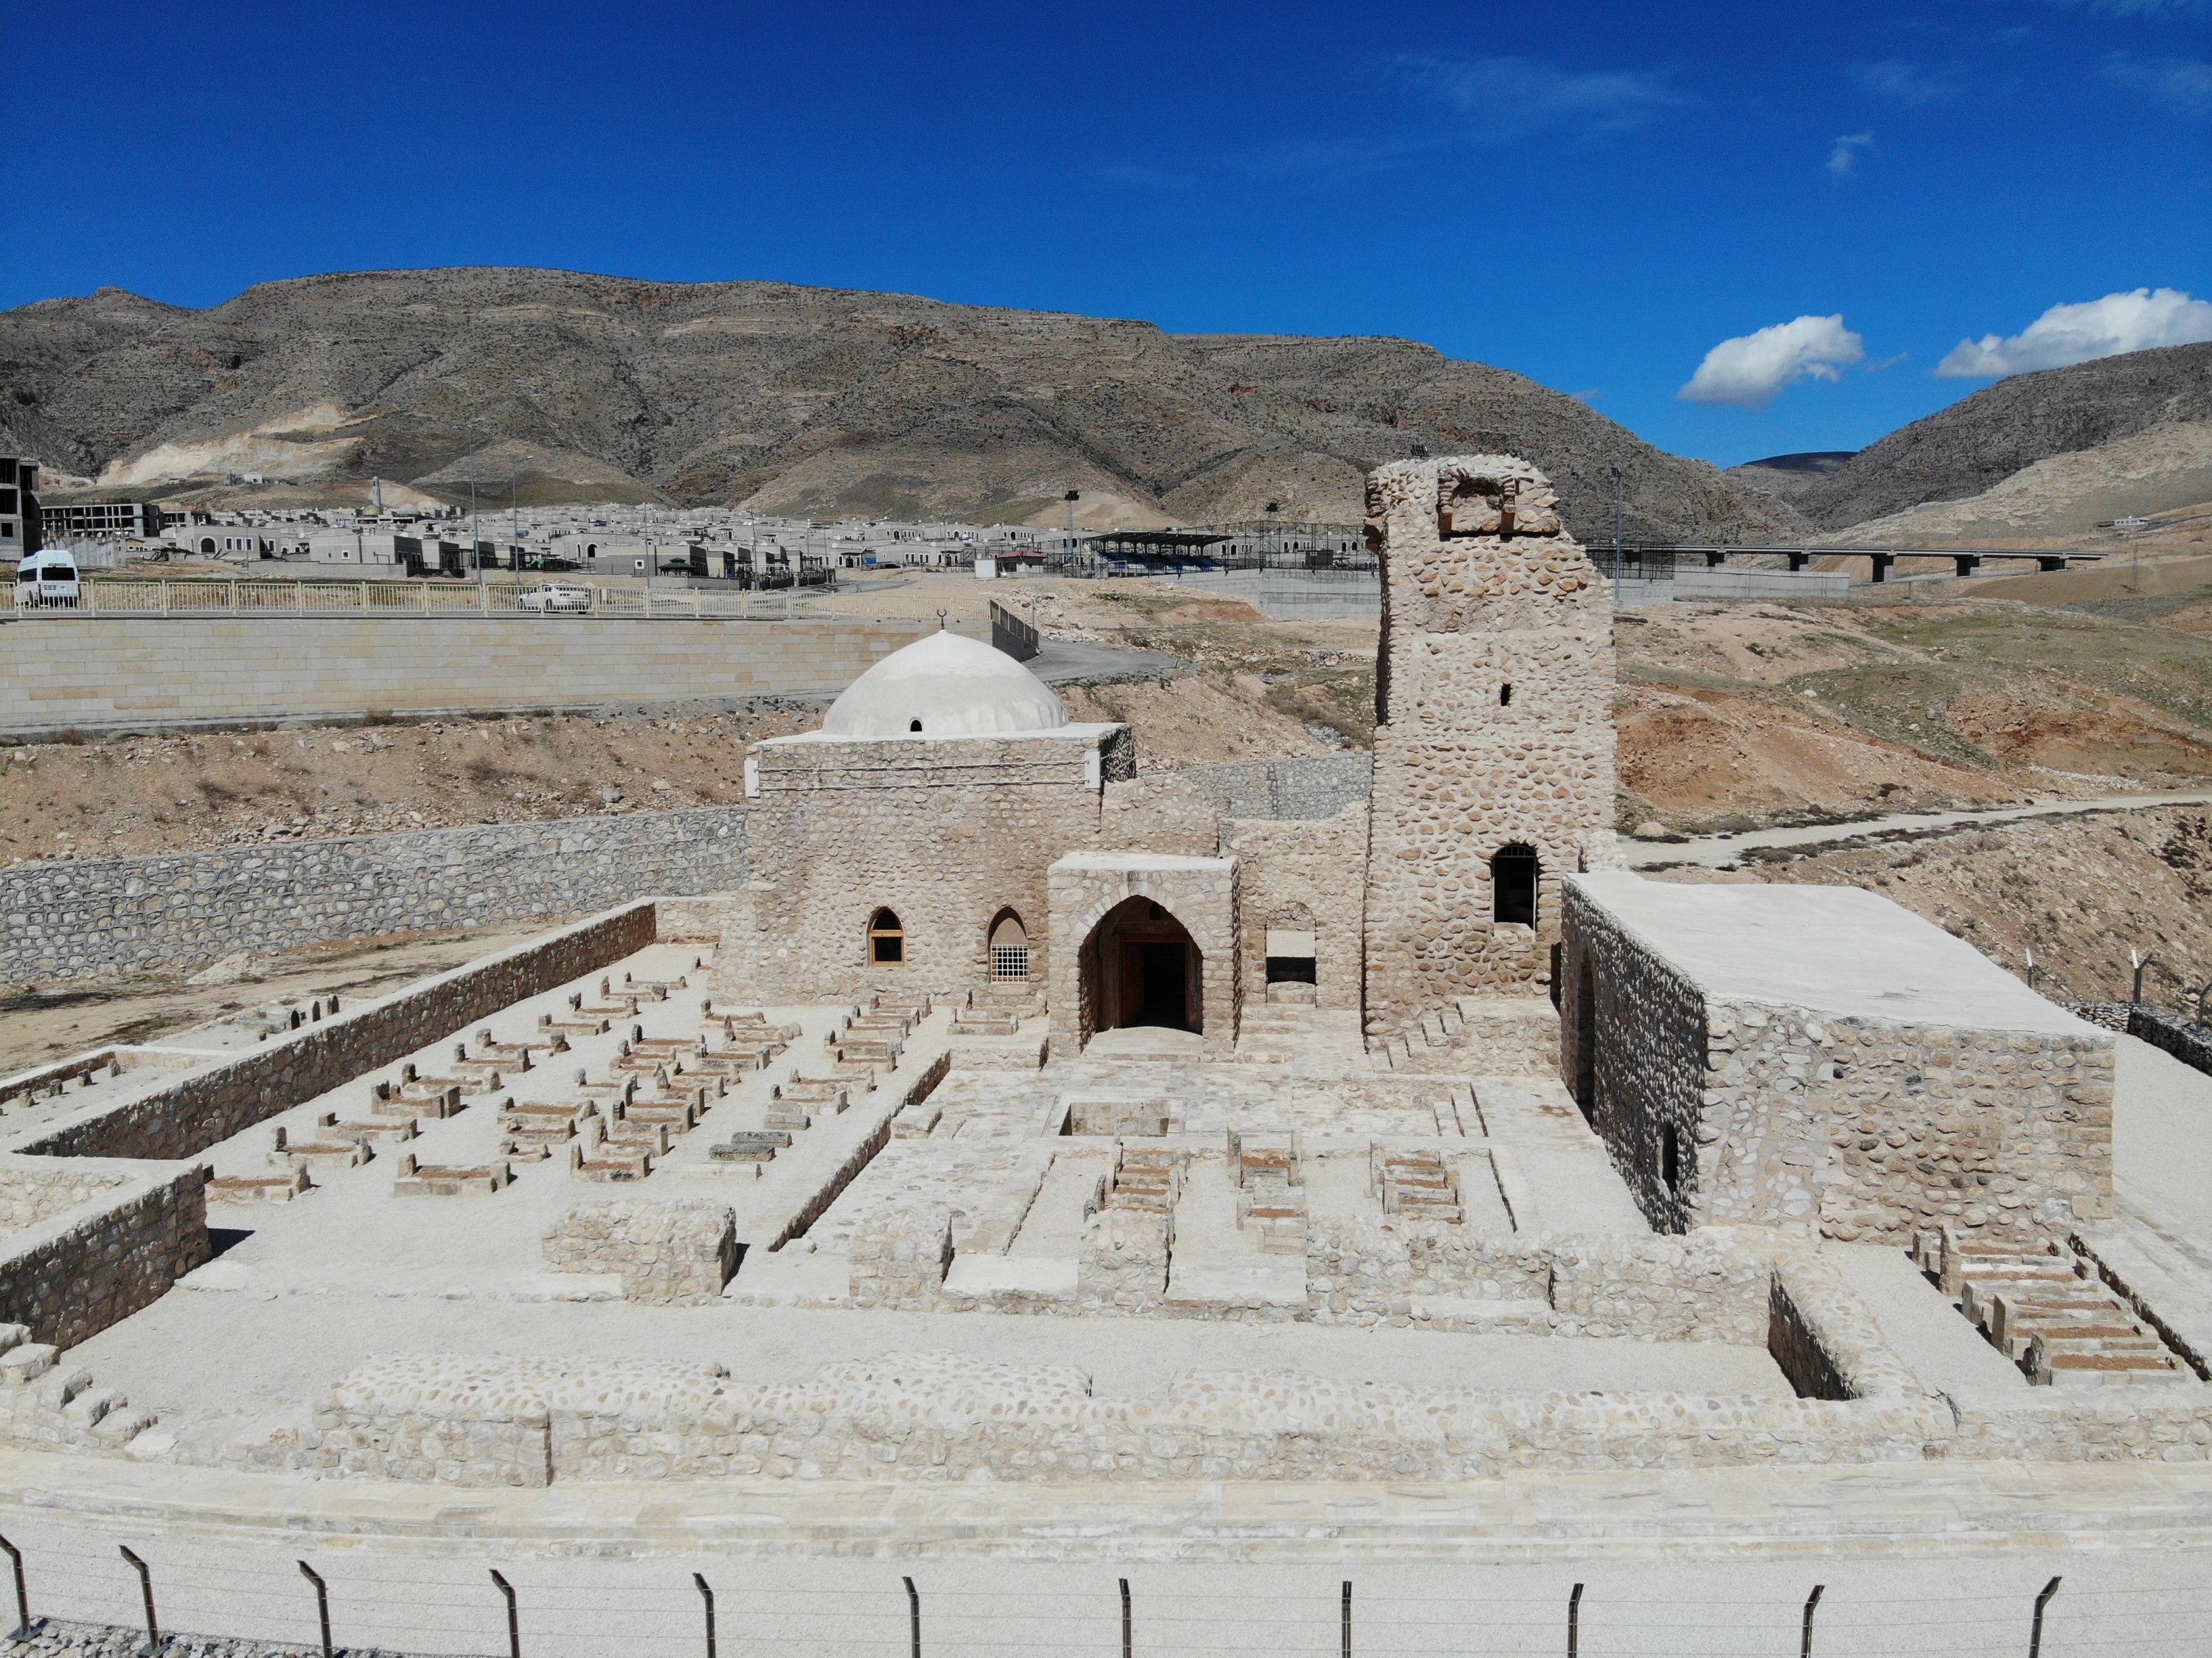 The restoration of artifacts moved from Hasankeyf, the historical district of Batman, which was flooded by the Ilısu Dam, has been completed, Batman, Türkiye, Oct. 11, 2022. (IHA Photo)